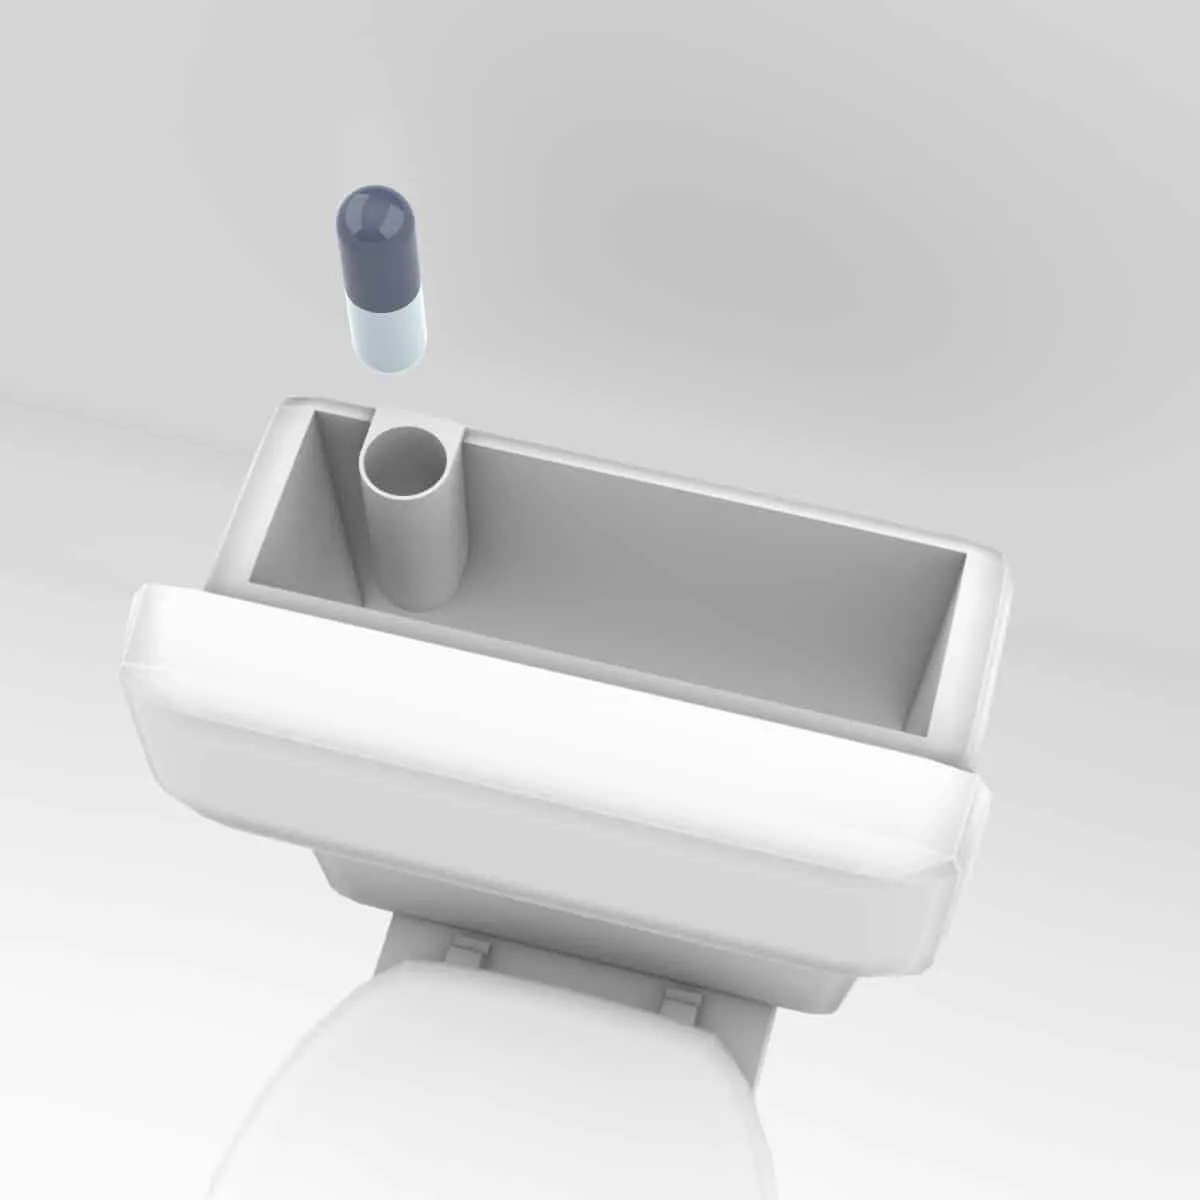 Automatic Toilet Cleaners: Searching for Good Stuff